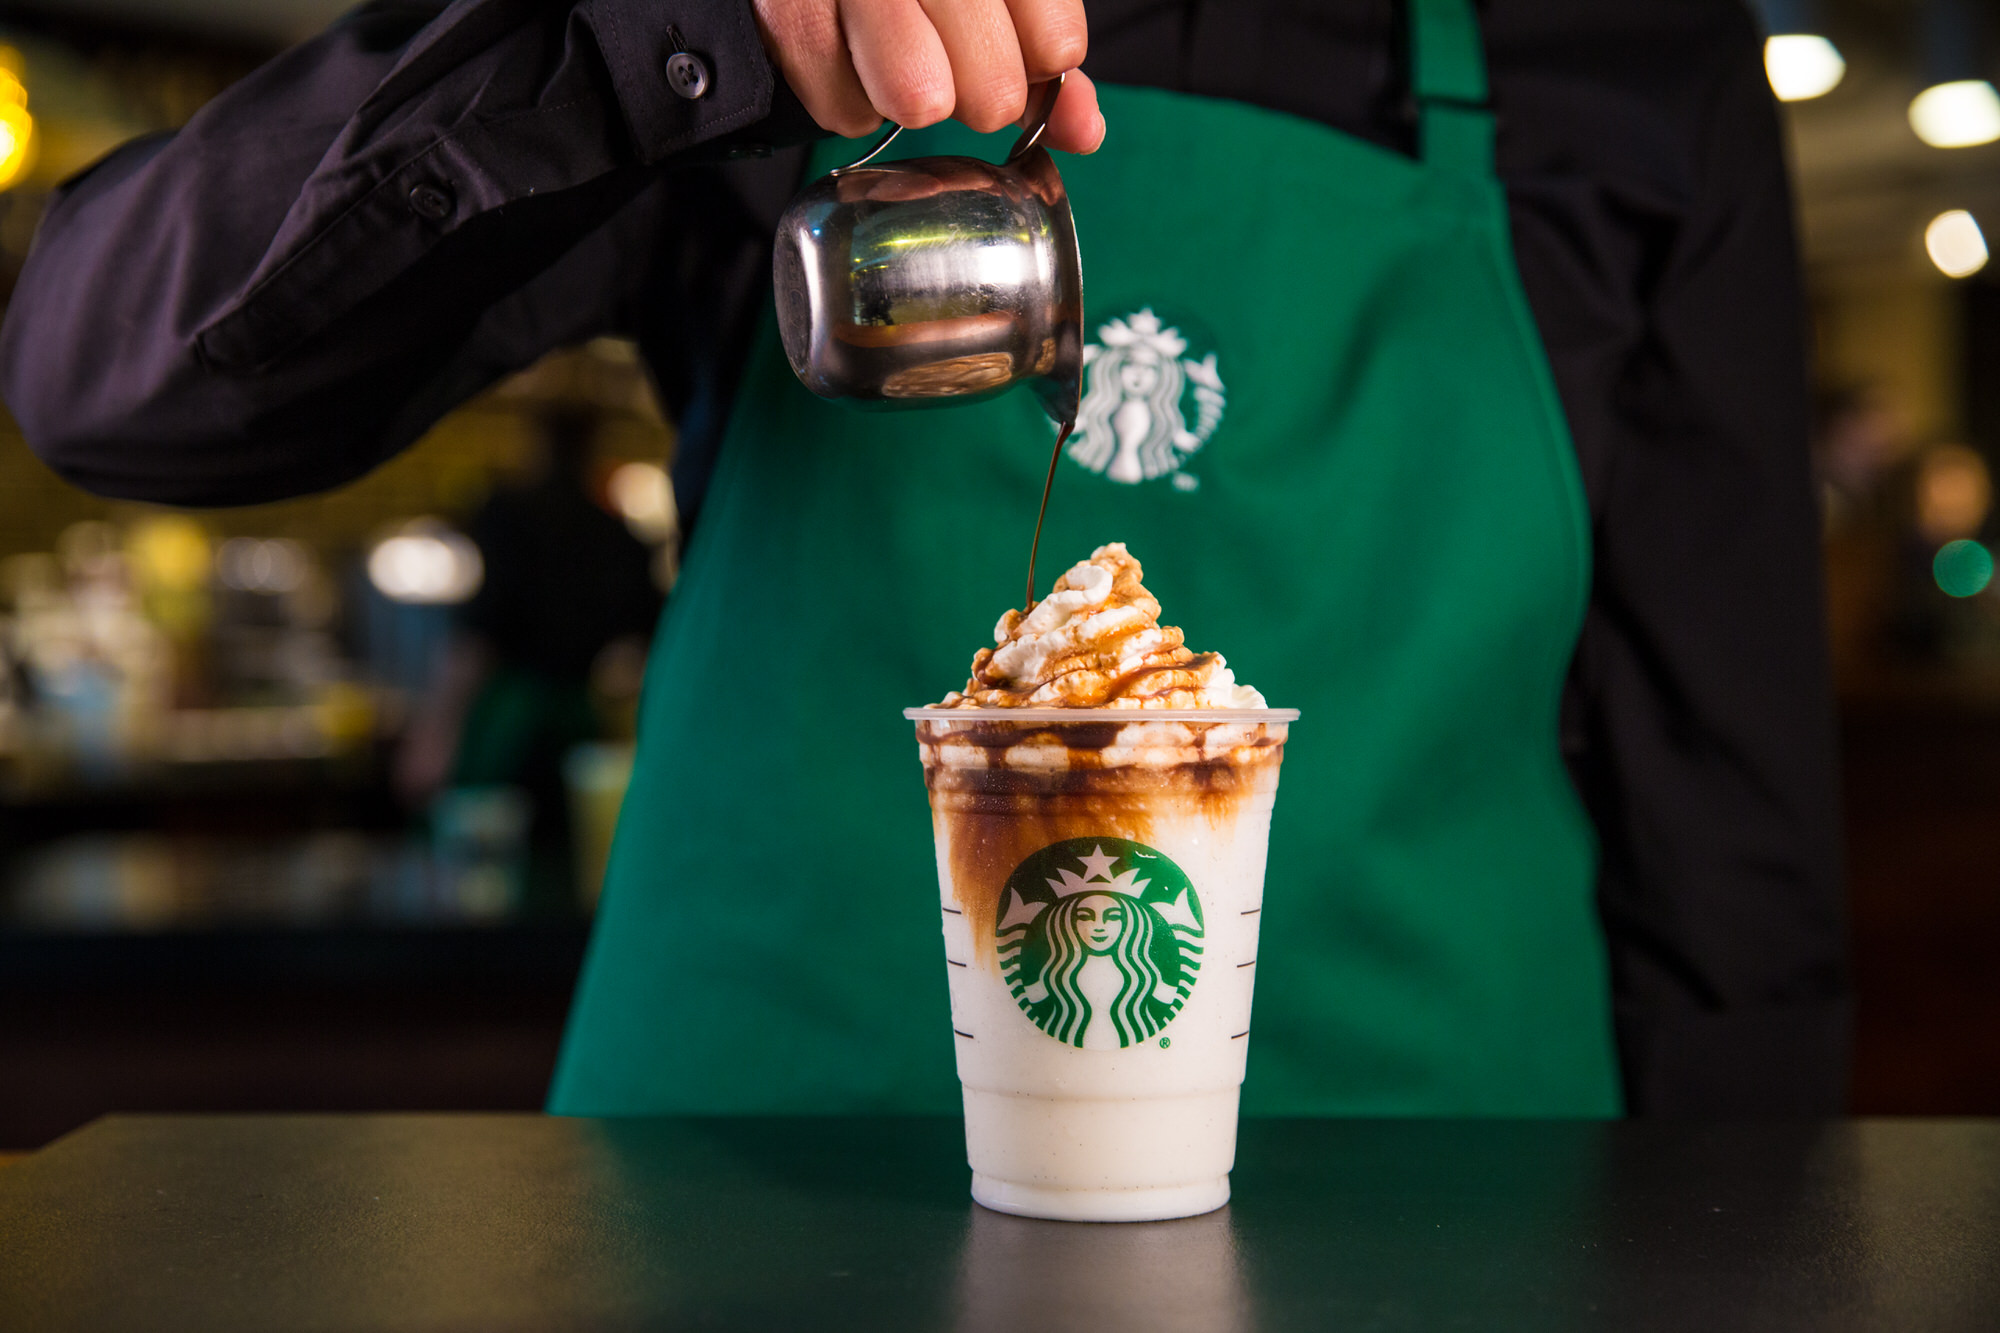 Starbucks. They're convenient and consistent so people still flock to them, myself included. But when it comes to quality, your local indie coffee shop is always going to be better (and often cheaper and more innovative too). -u/techtchotchke